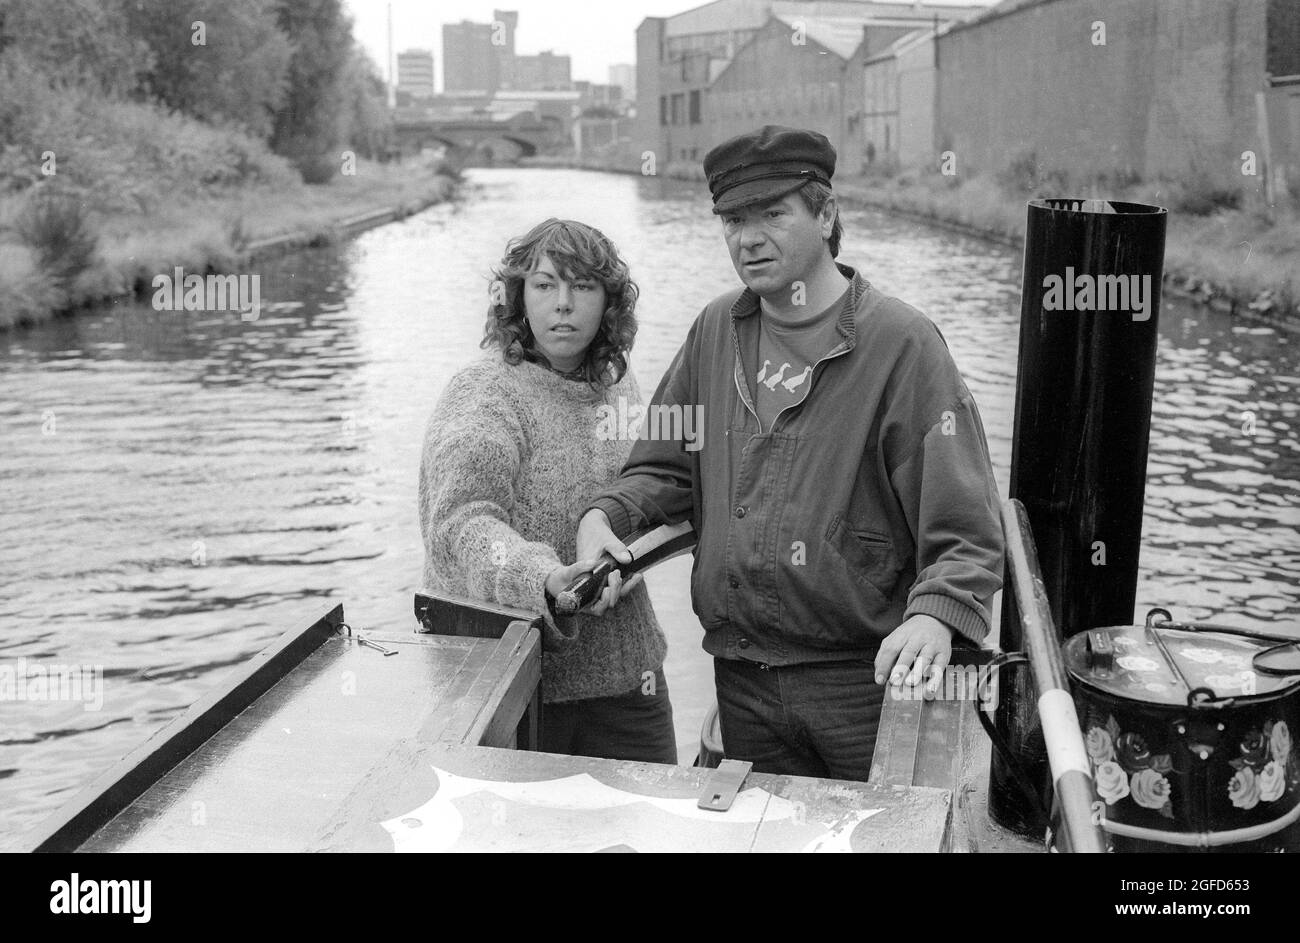 'Cap'n' Michael: actor Michael Elphick as BOON the leading character for the Central TV series BOON in 1985 takes time of from filming to enjoy the life on narrow boat canal craft as he learns to navigate the craft through the Birmingham canal system. Stock Photo